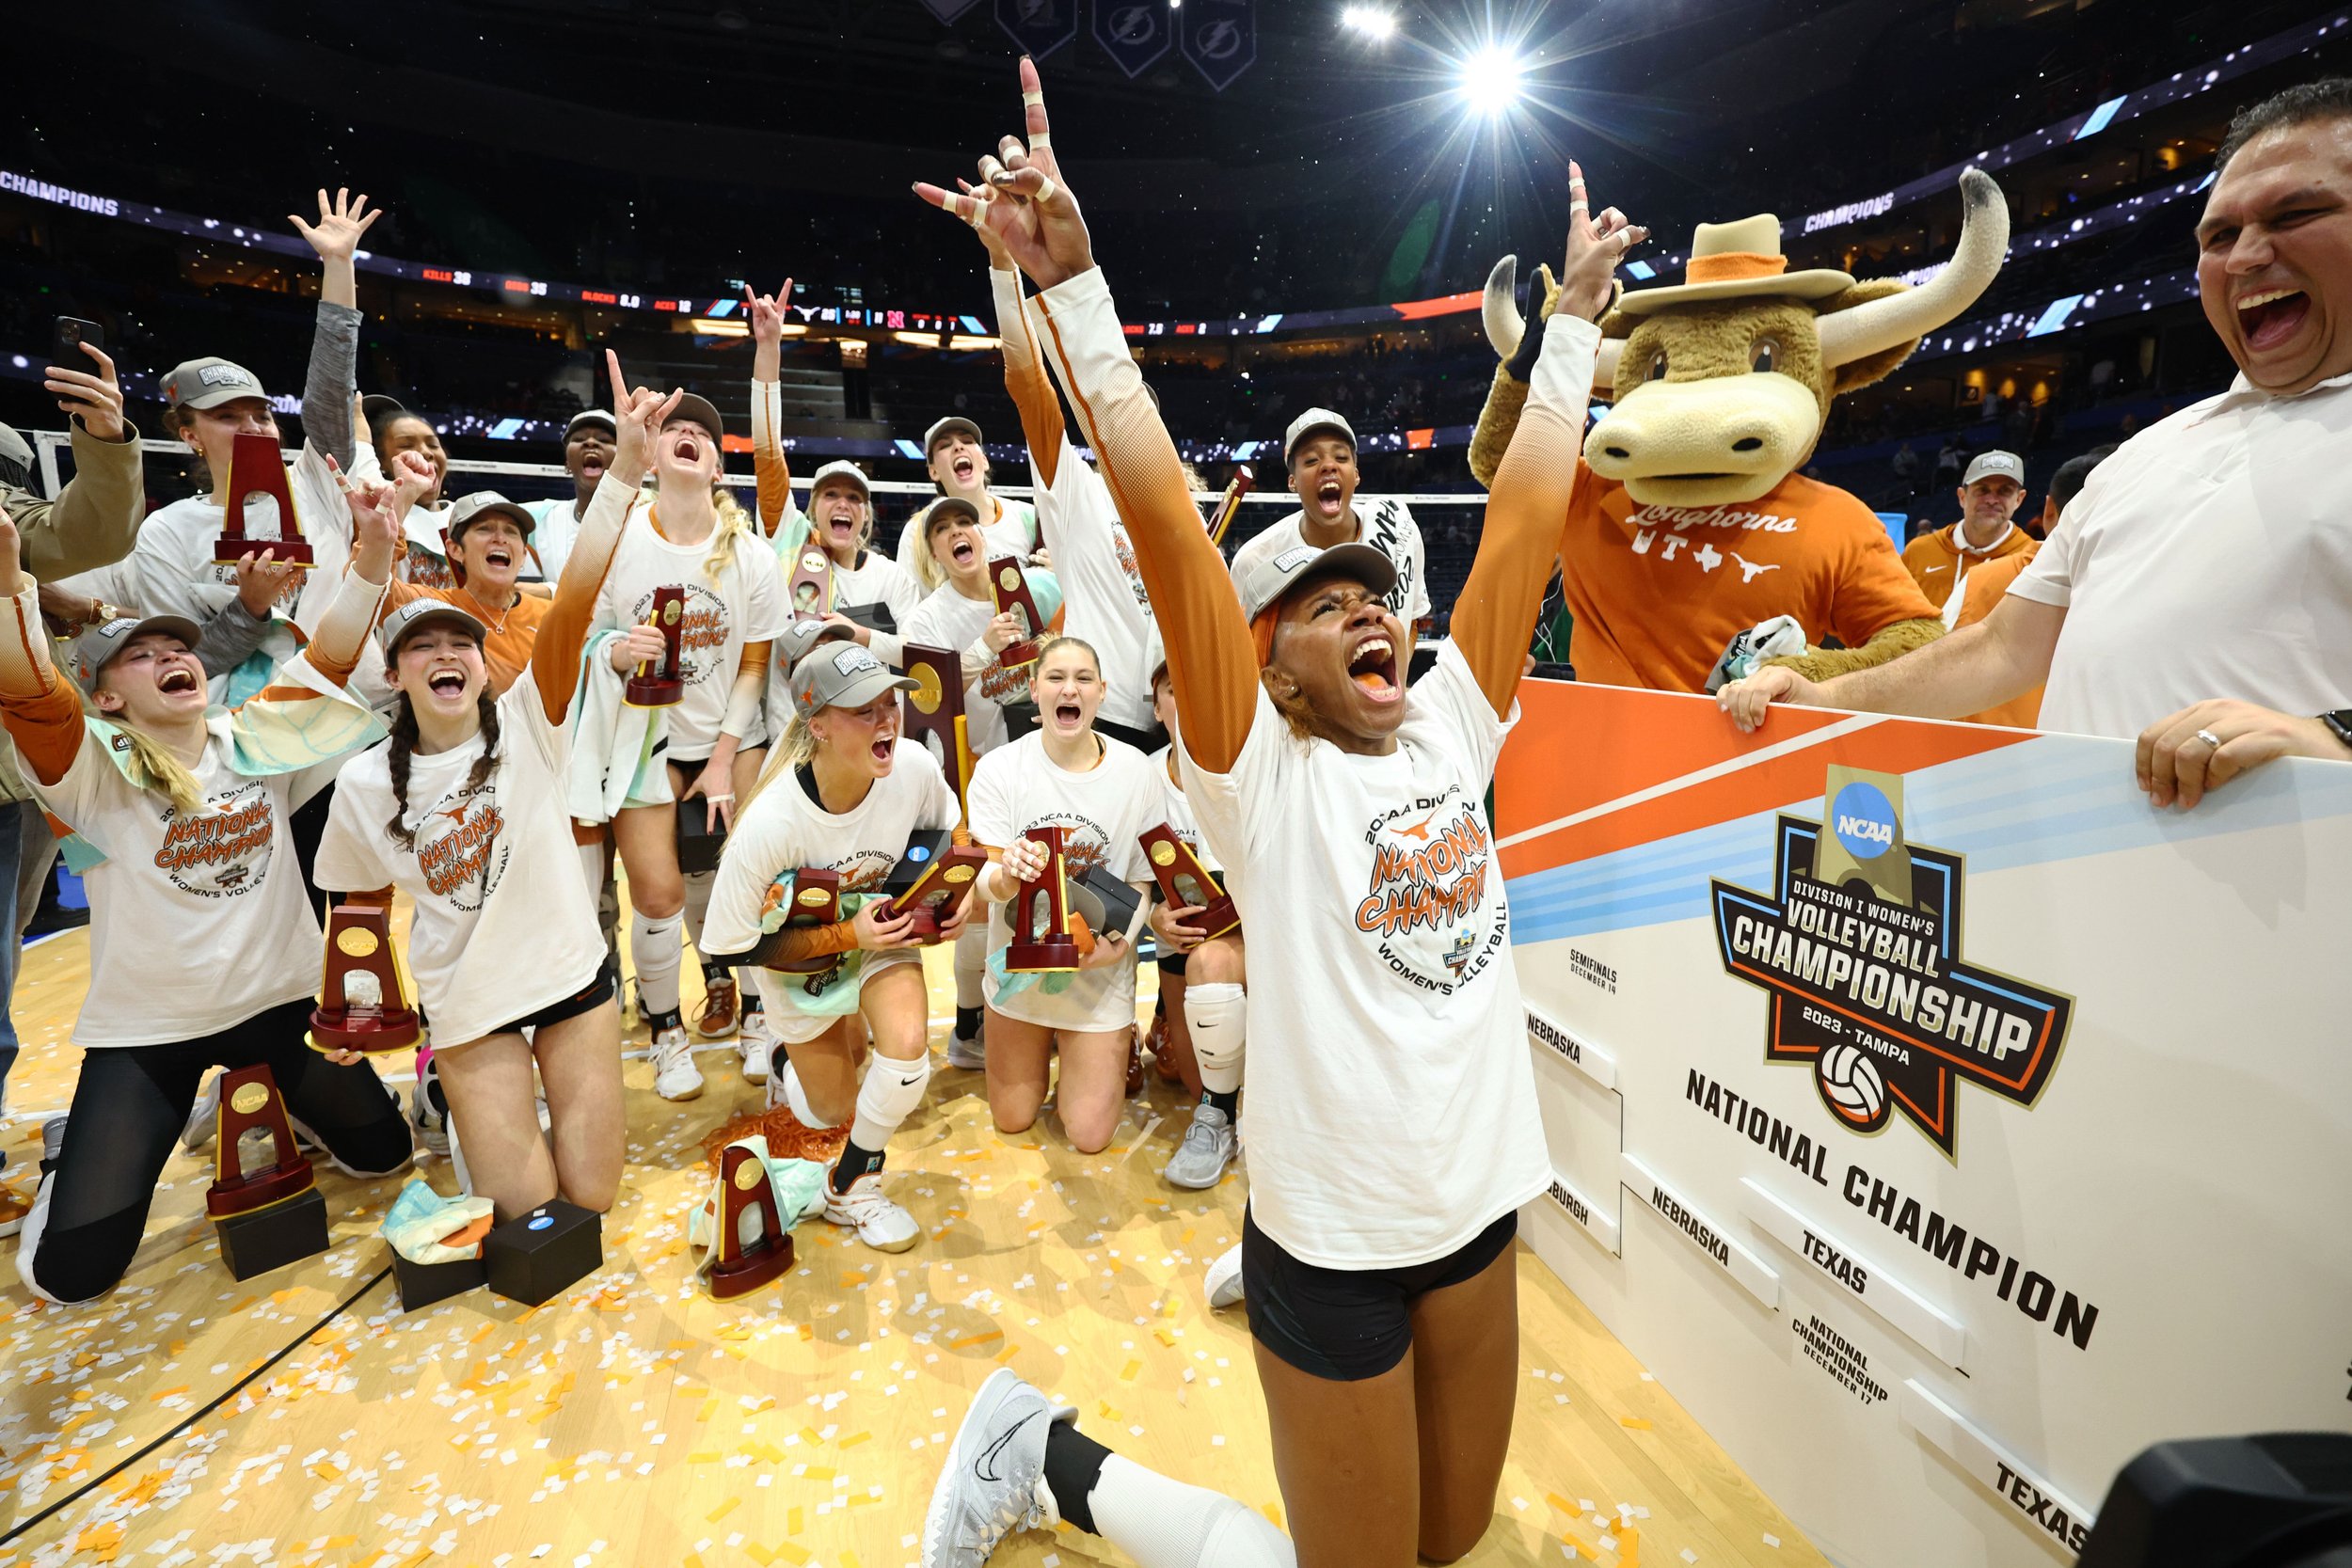  TAMPA, FLORIDA - DECEMBER 17: The Texas Longhorns celebrate after defeating the Nebraska Cornhuskers 3-0 to win the 2023 Division I Women's Volleyball Championship at Amalie Arena on December 17, 2023 in Tampa, Florida. (Photo by Jamie Schwaberow/NC